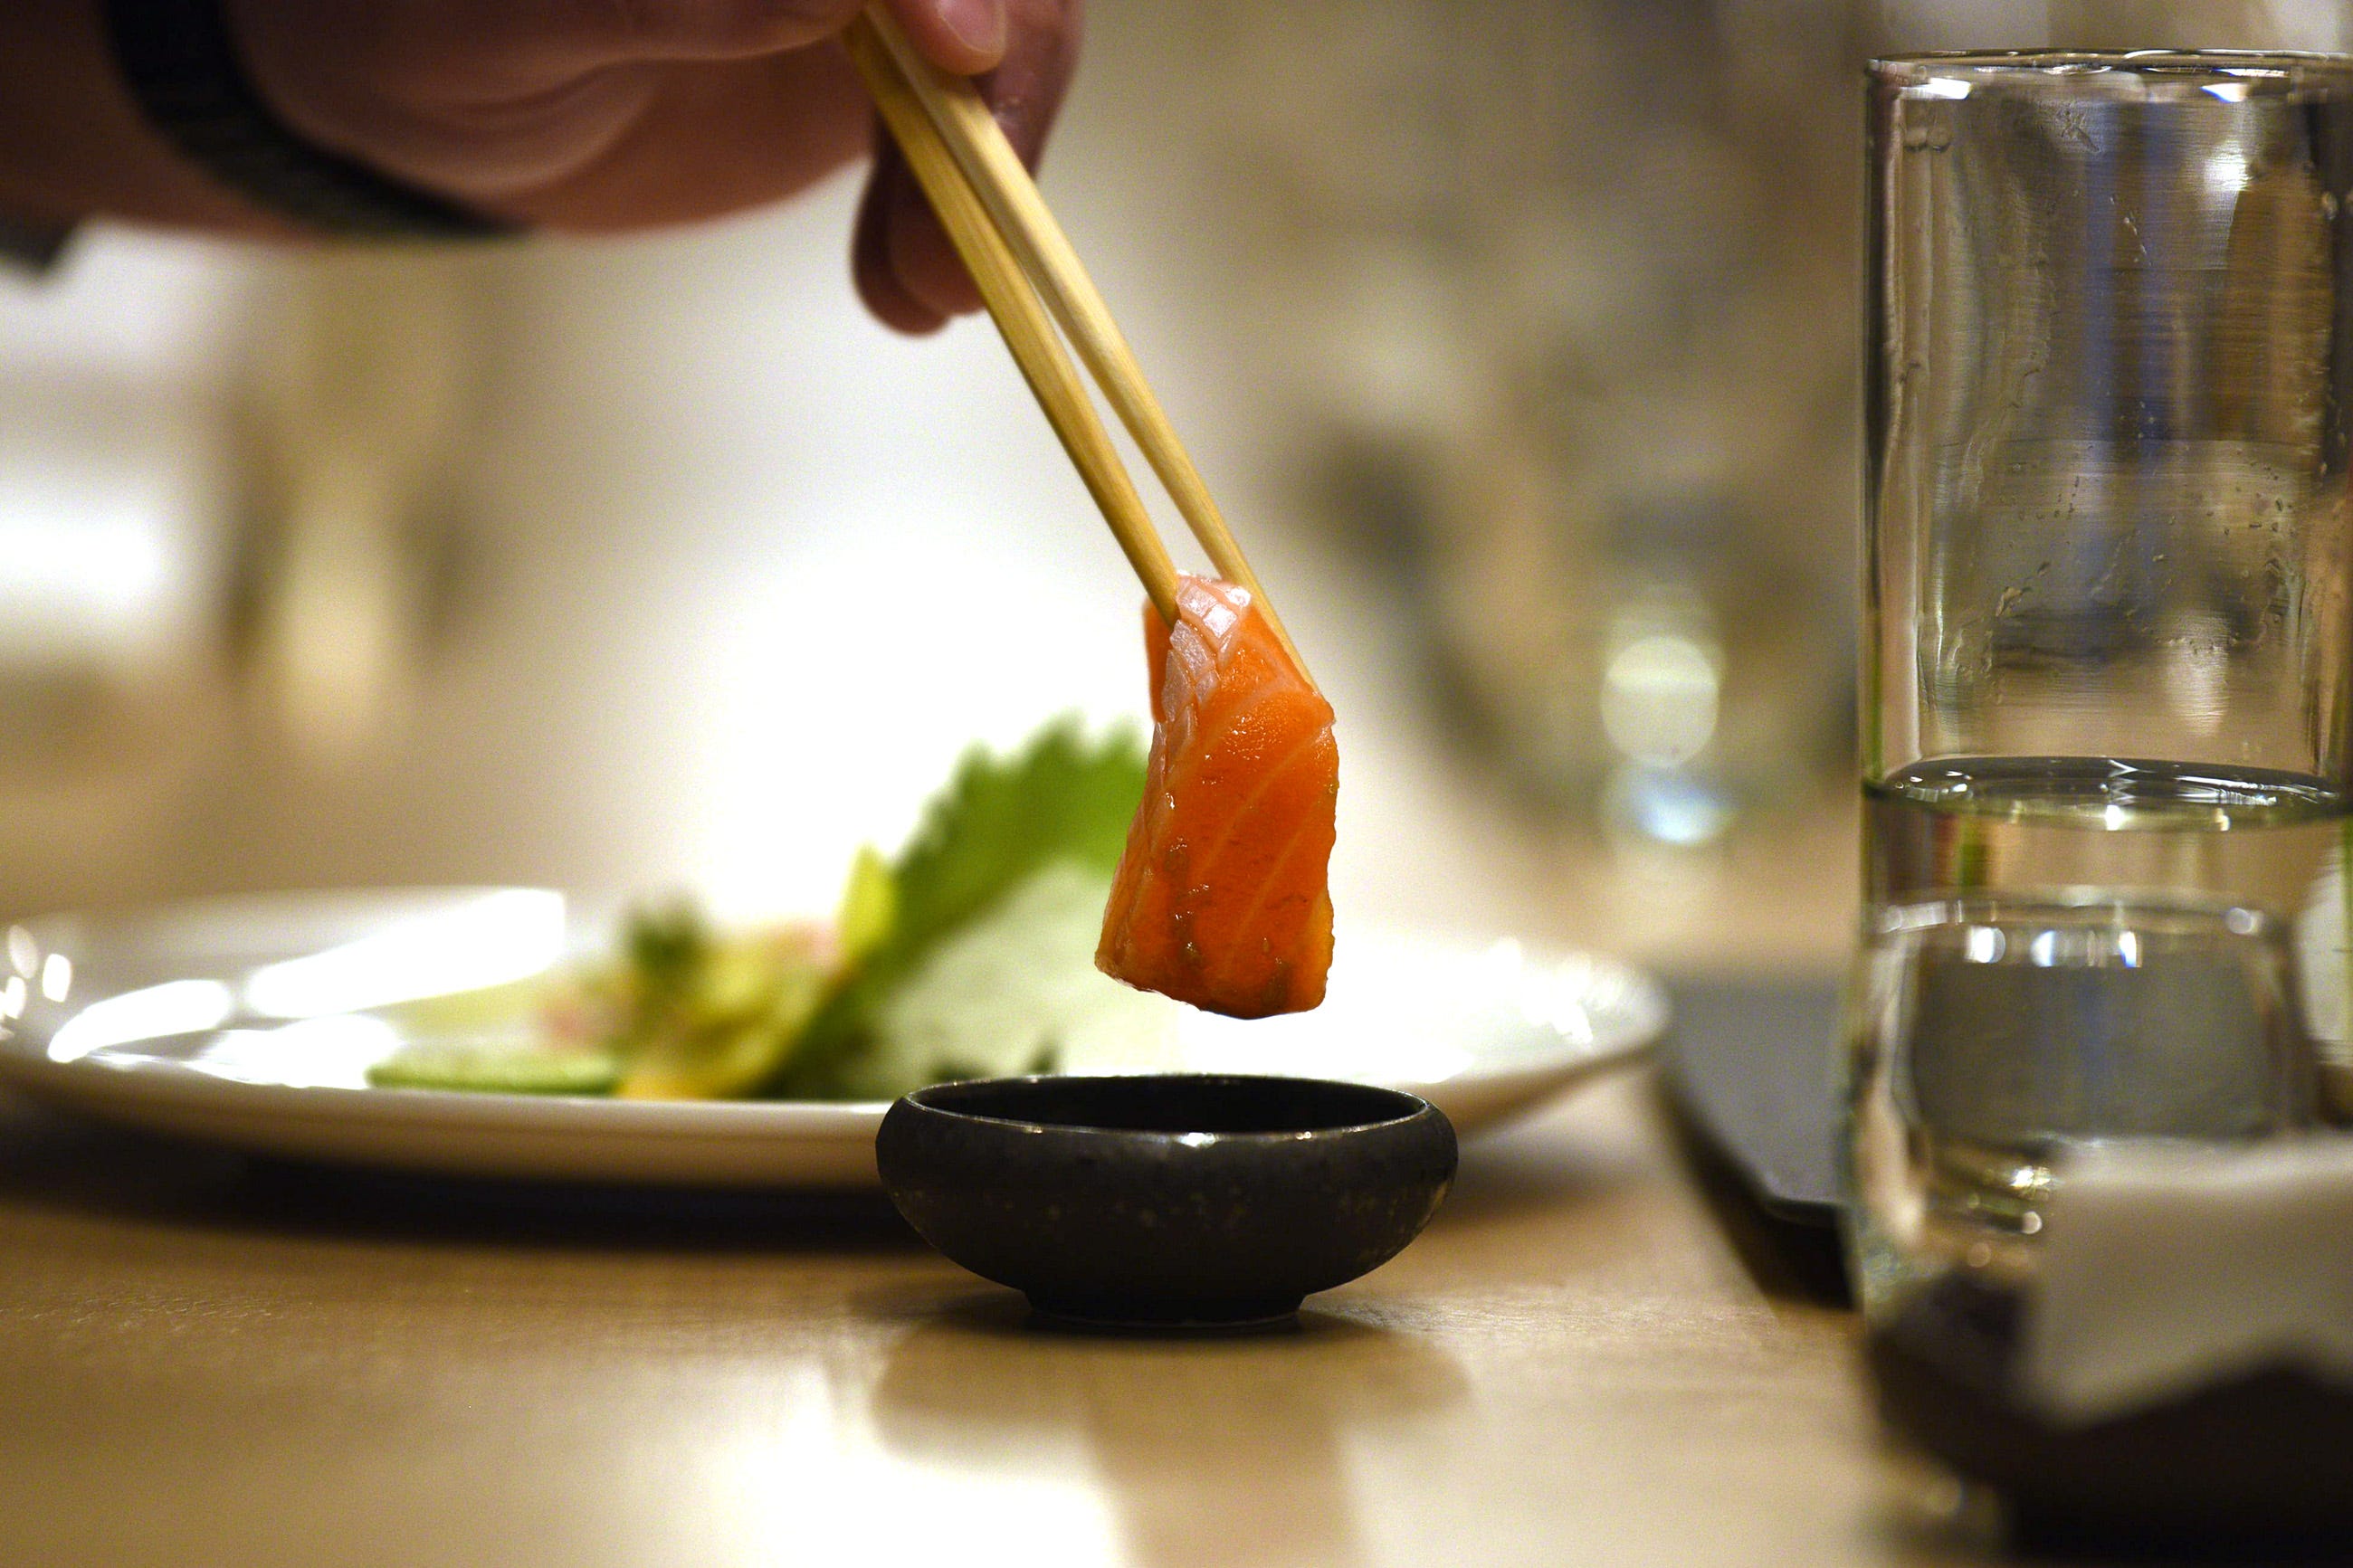 Customers dine on sushi and sashimi, like this piece of sliced salmon at Sushi Kai in Fort Lee.